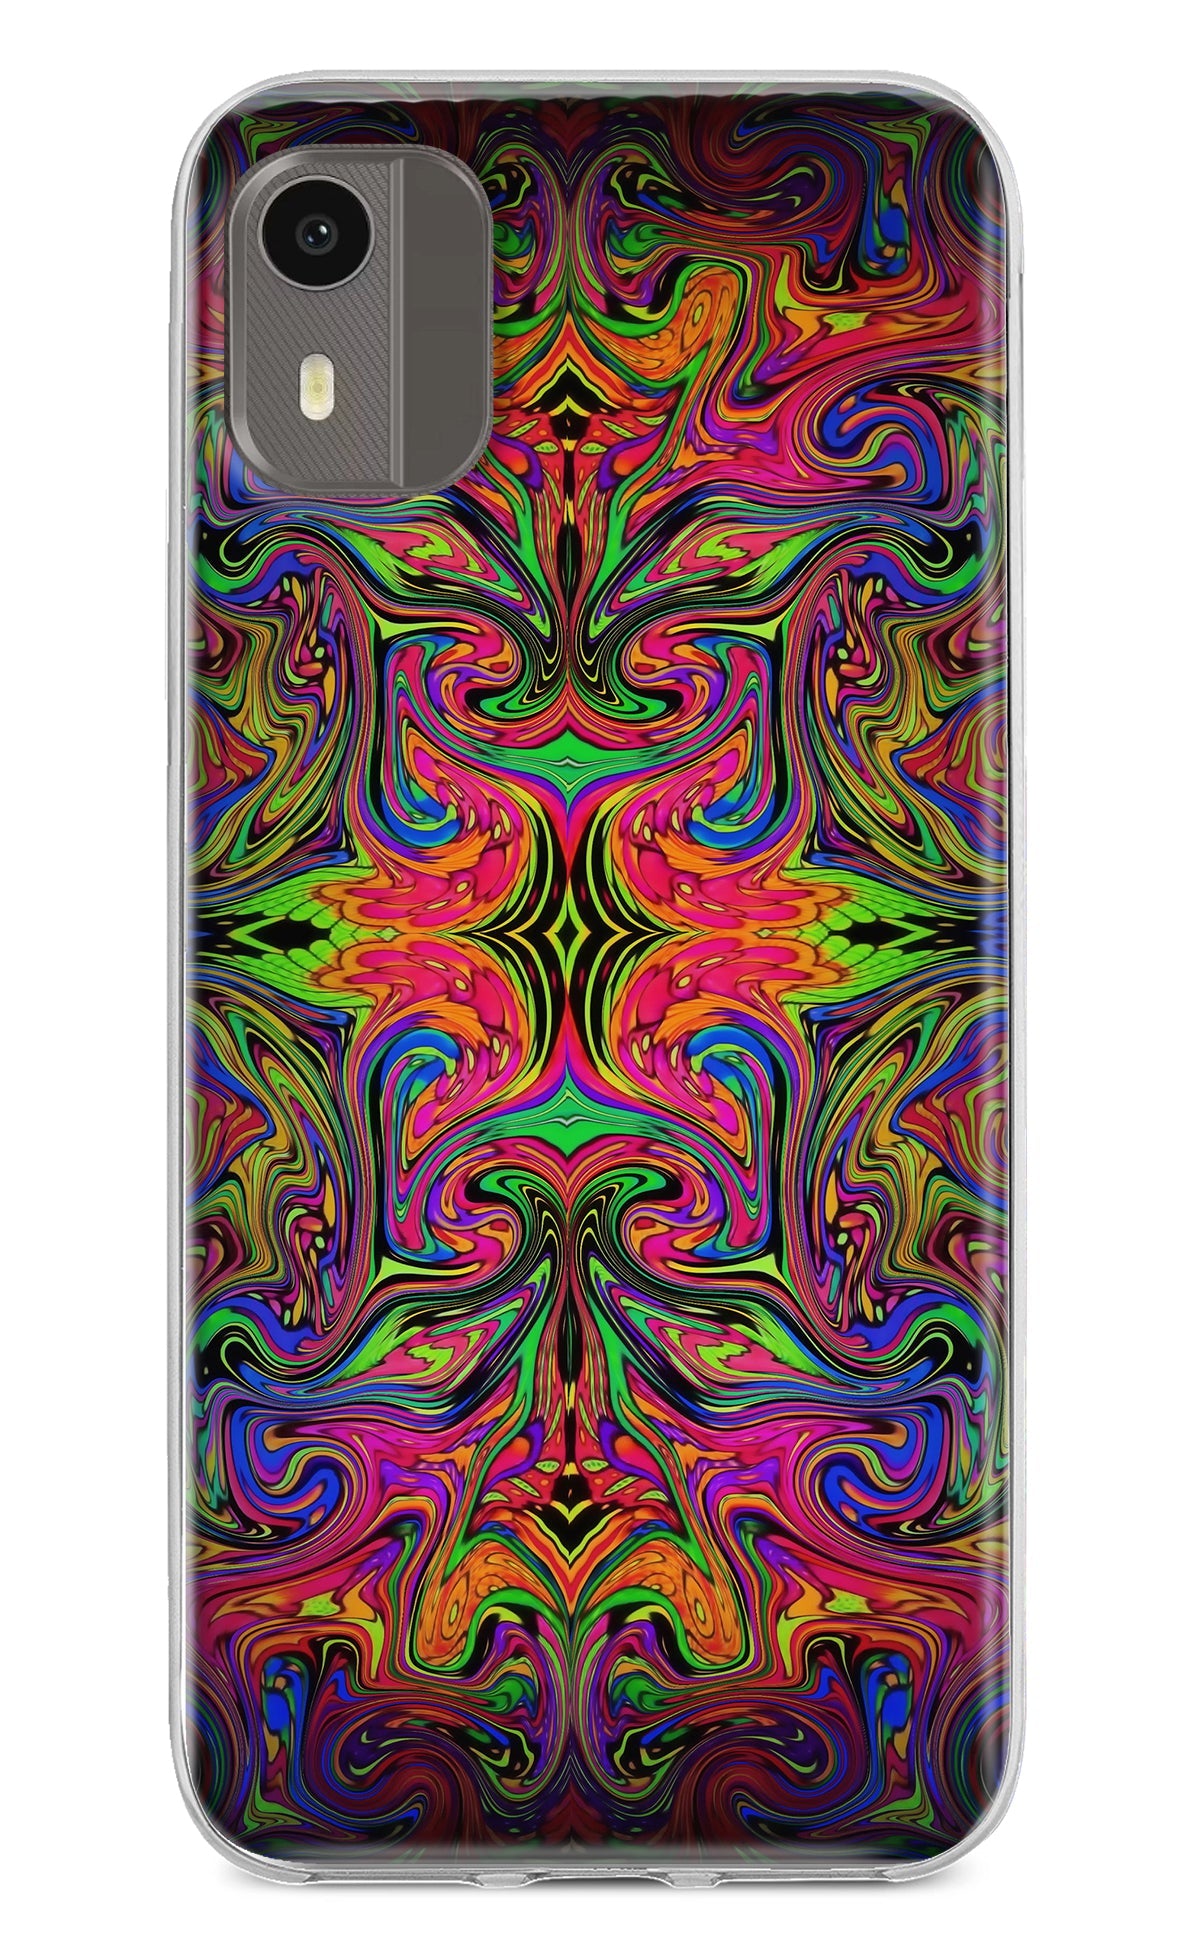 Psychedelic Art Nokia C12/C12 Pro Back Cover